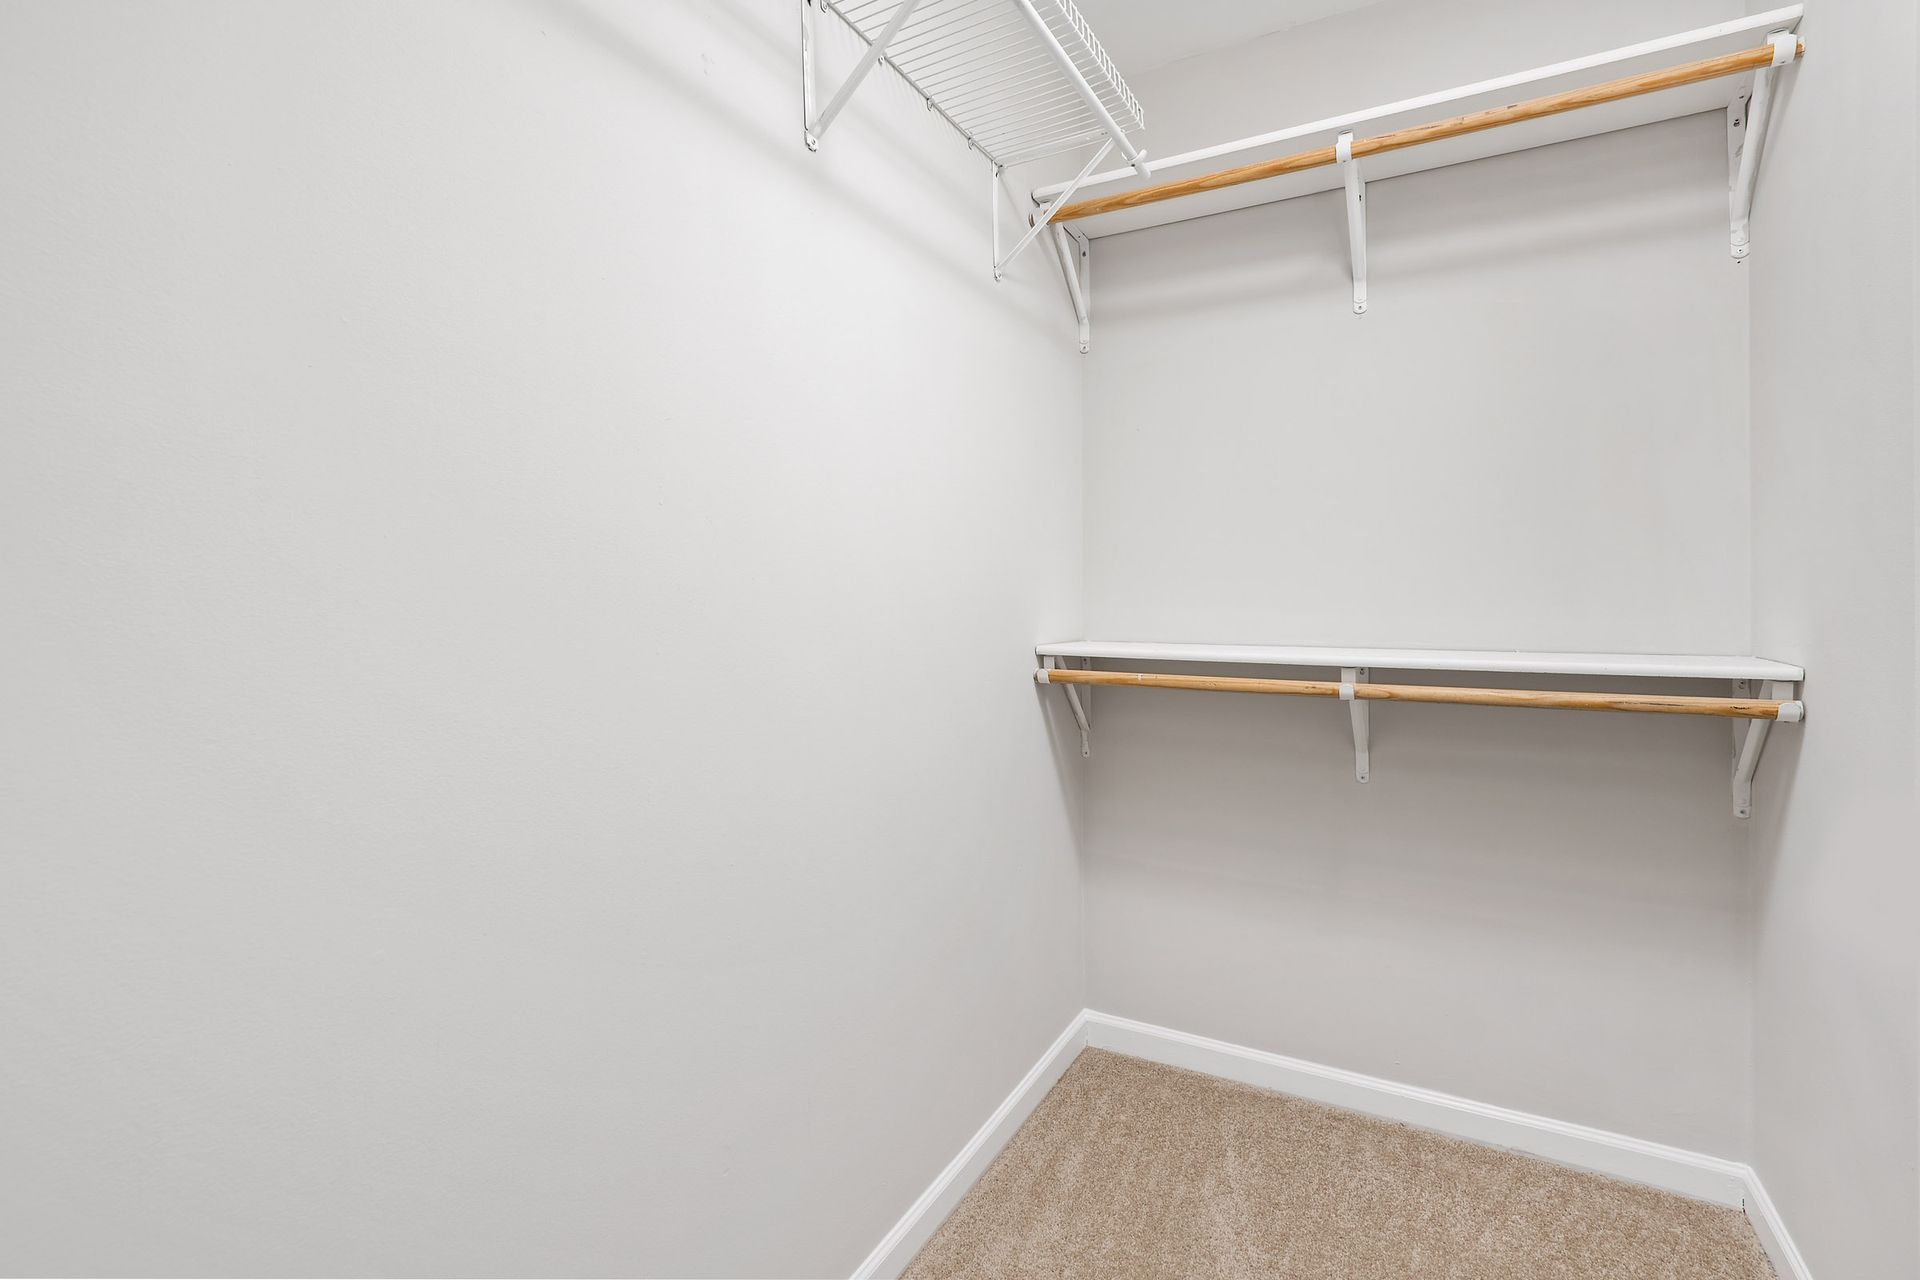 An empty walk-in closet with shelves and a carpeted floor at 2010 West Pierce Avenue.